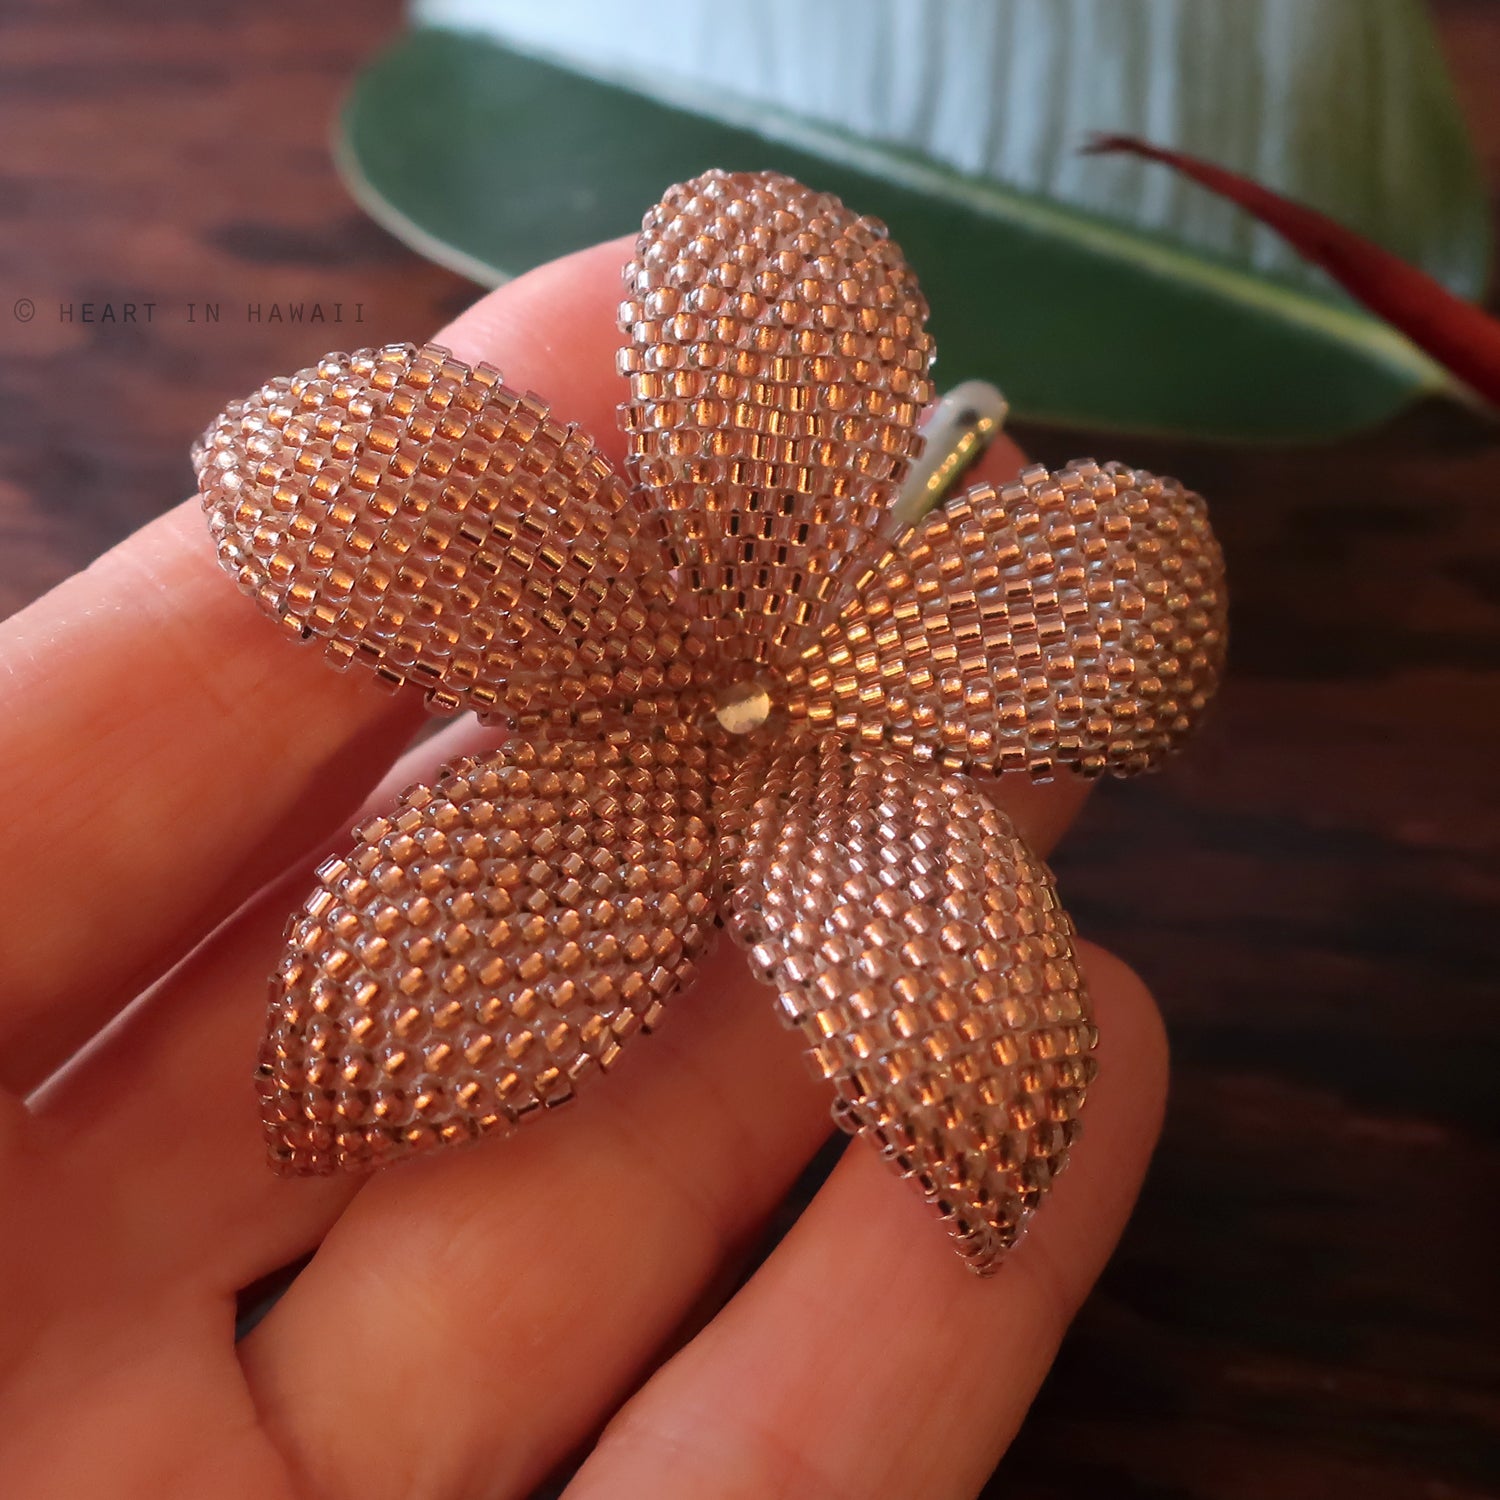 Heart in Hawaii 2.5 inch Beaded Plumeria Flower - Sparkly Copper